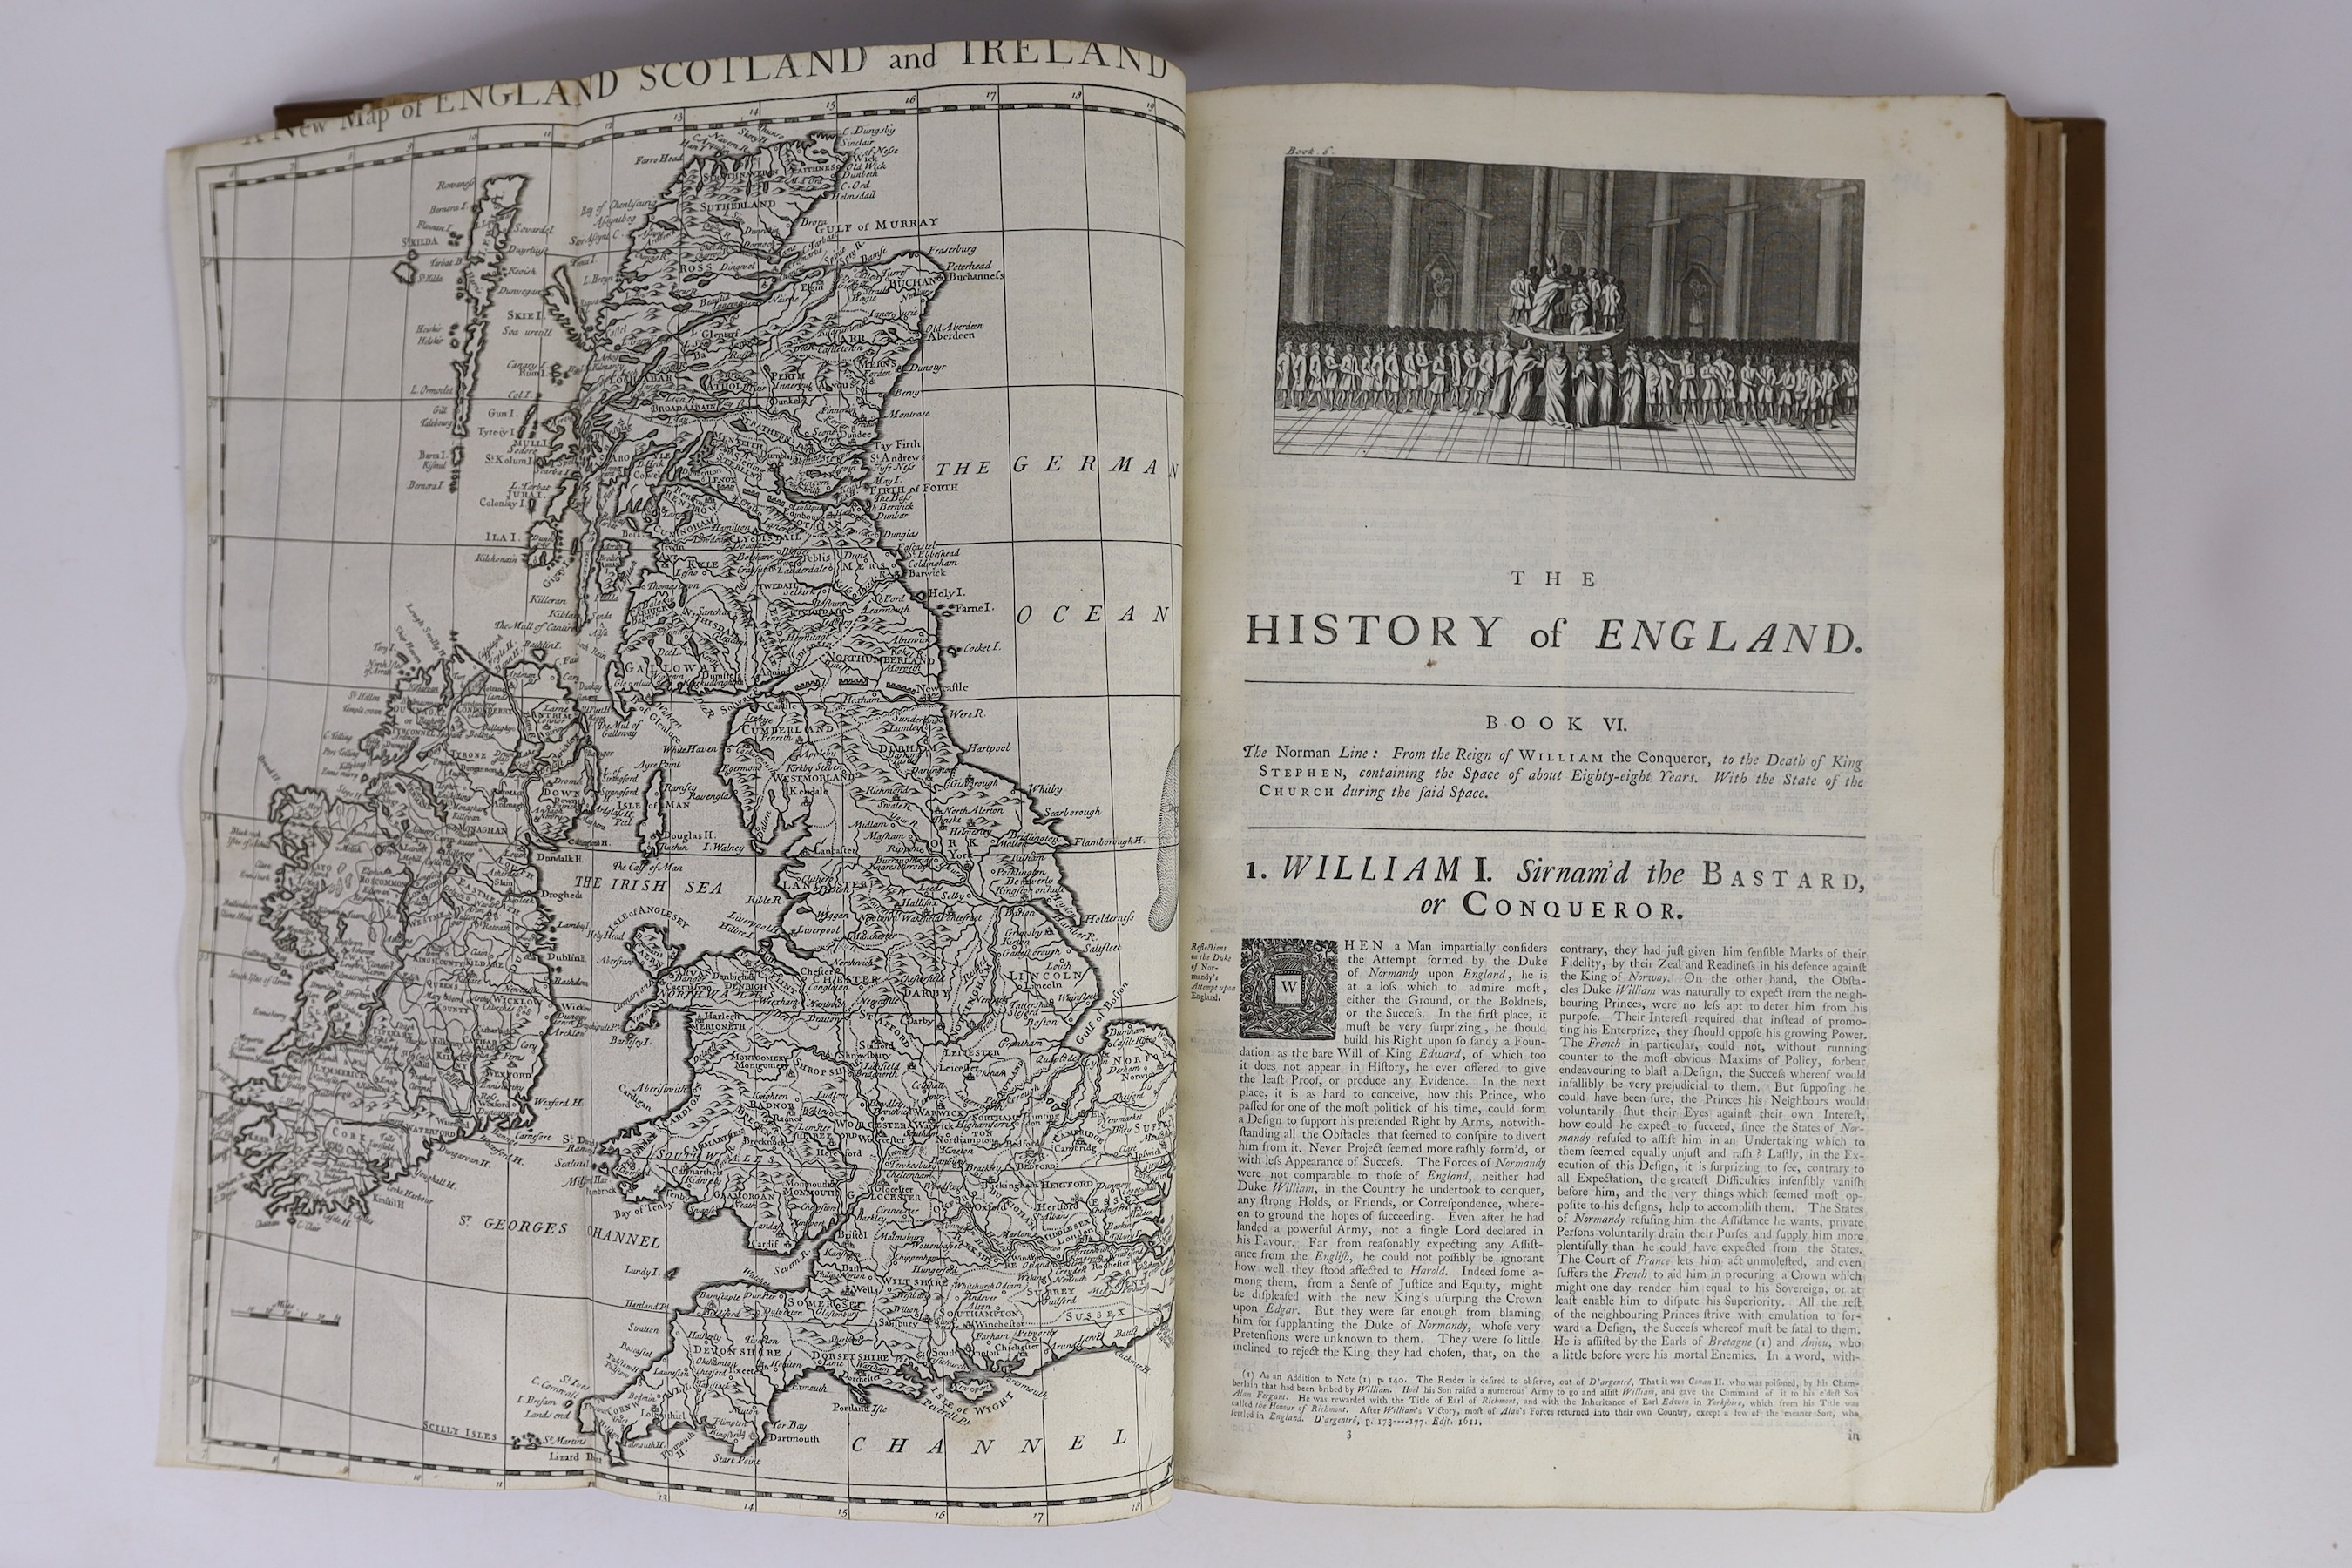 Rapin de Thoryras, Paul - The History of England, 2nd edition, 2 vols, folio, rebound full calf, with 4 folding maps, lacking portrait, red ink staining to leaf edges at end of vol 2, James, John and Paul Knapton, London